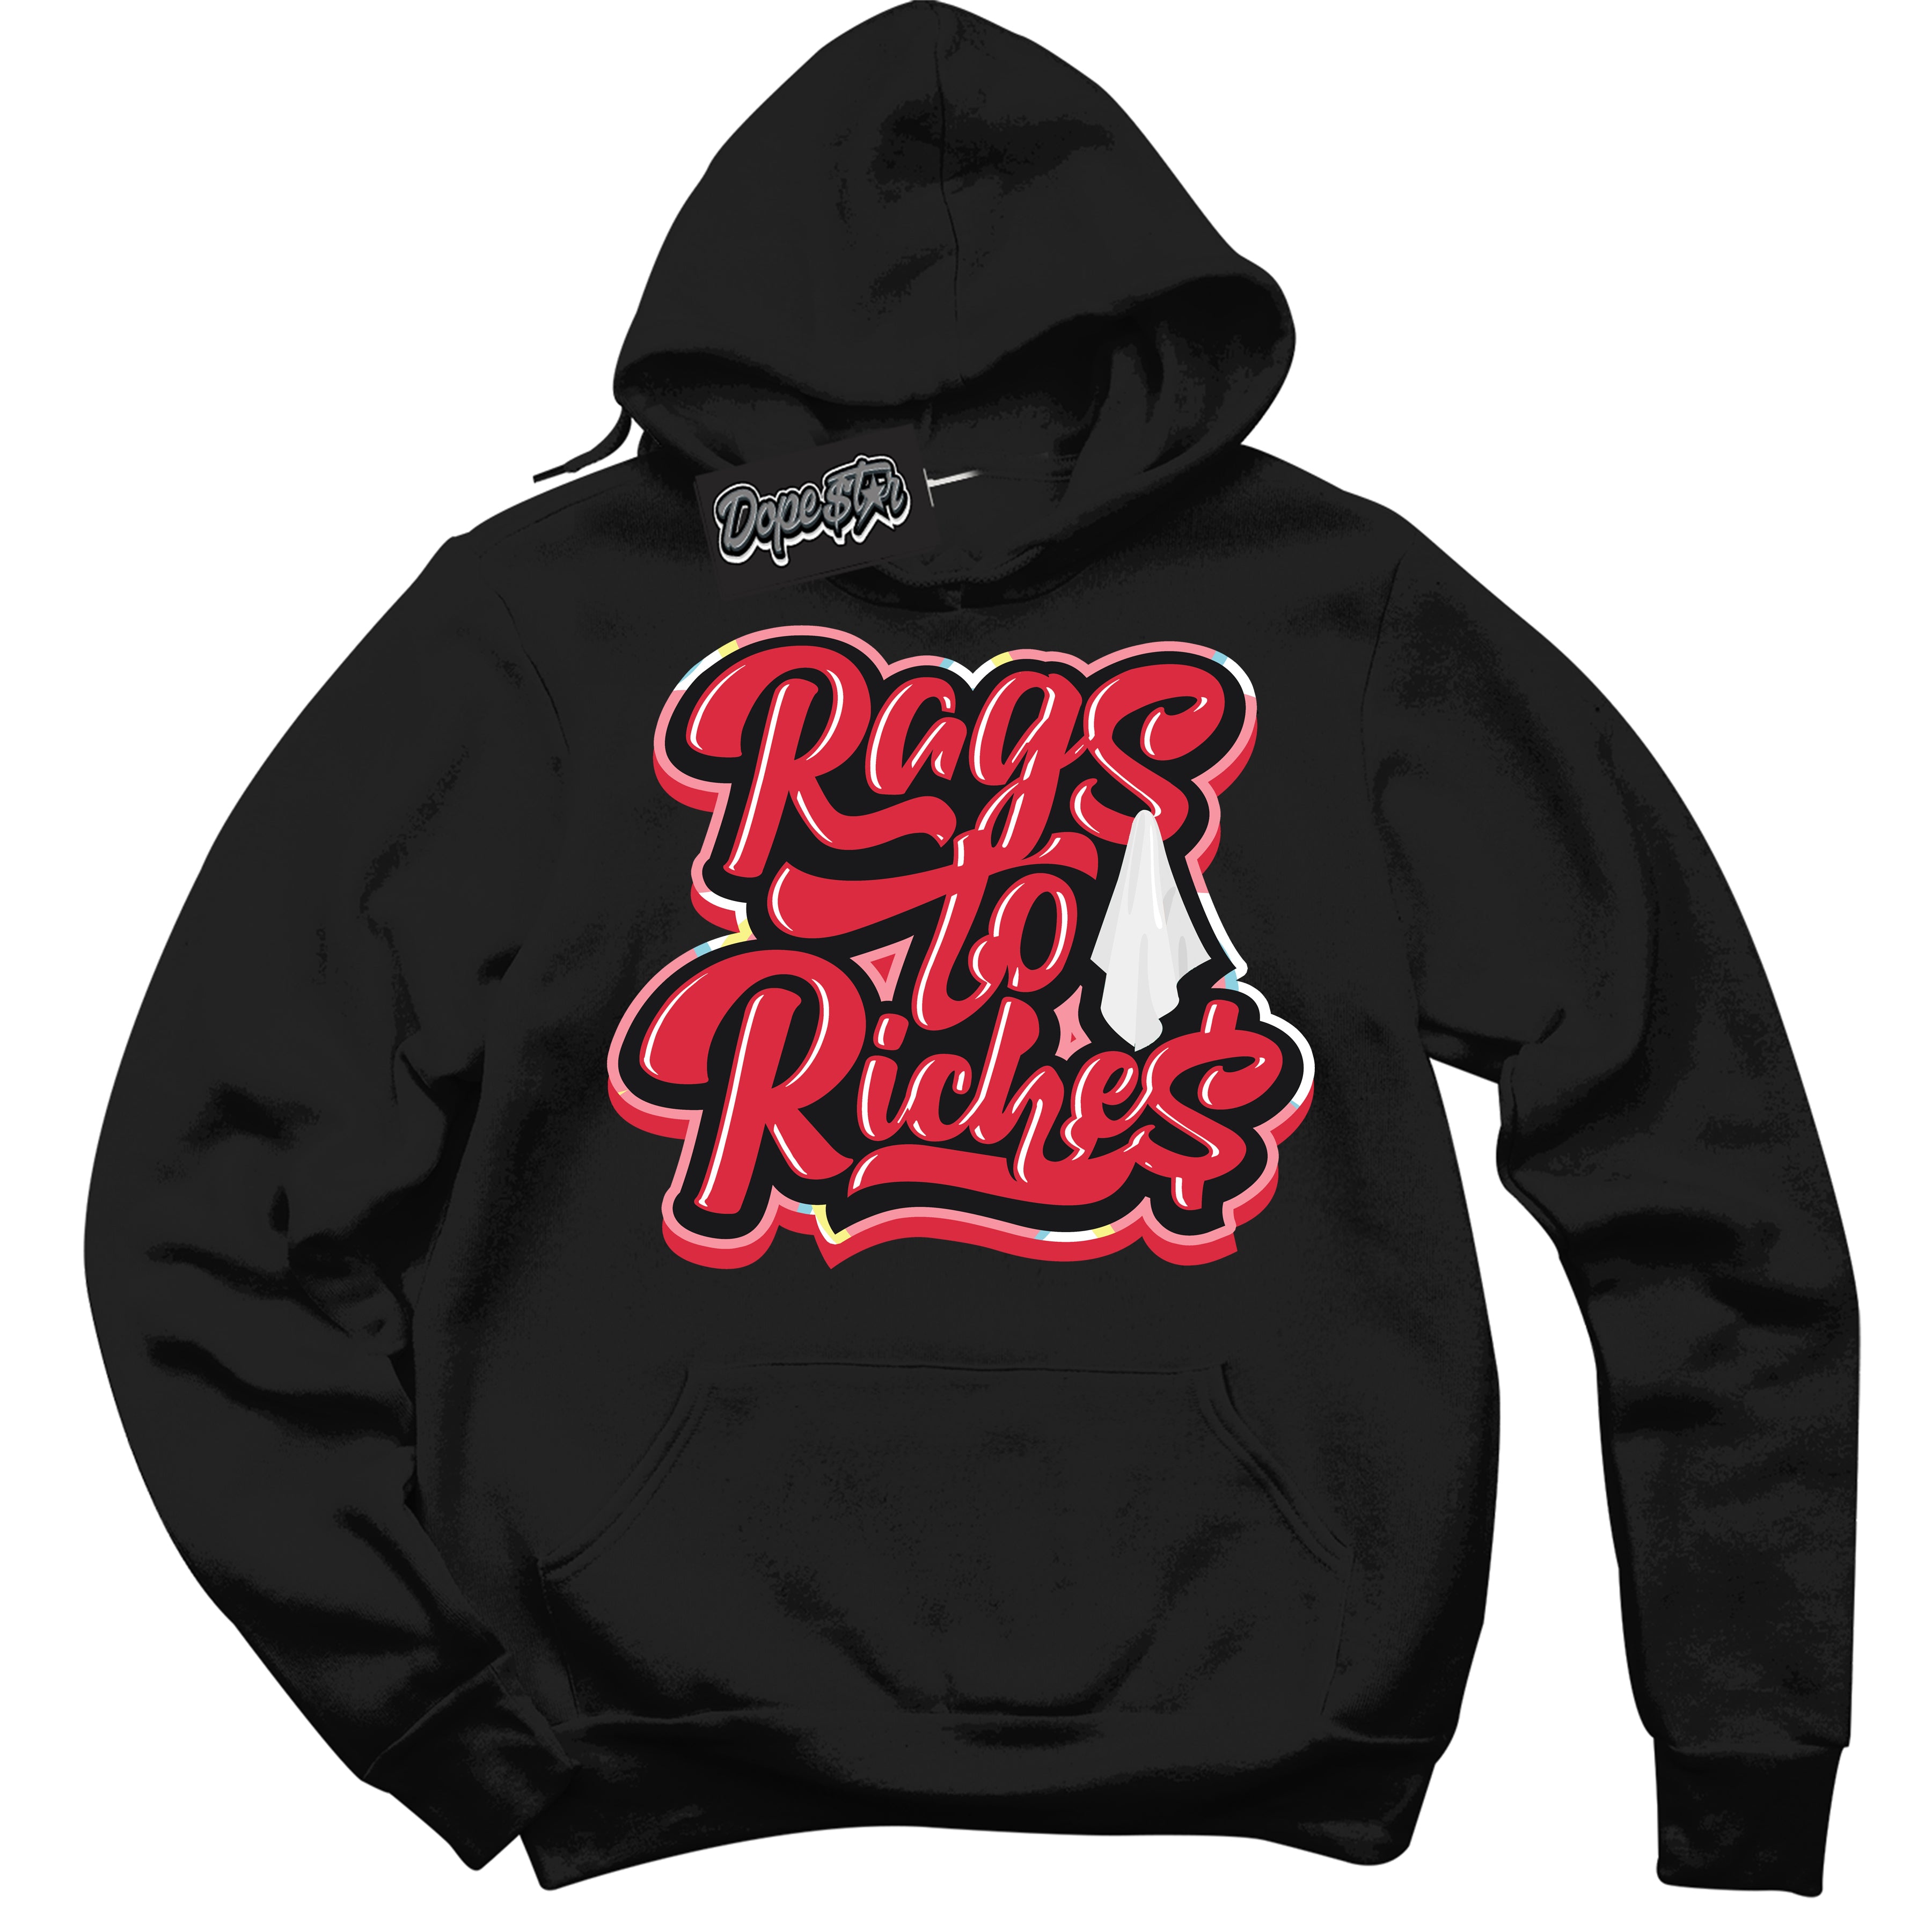 Cool Black Graphic DopeStar Hoodie with “ Rags To Riches “ print, that perfectly matches Spider-Verse 1s sneakers